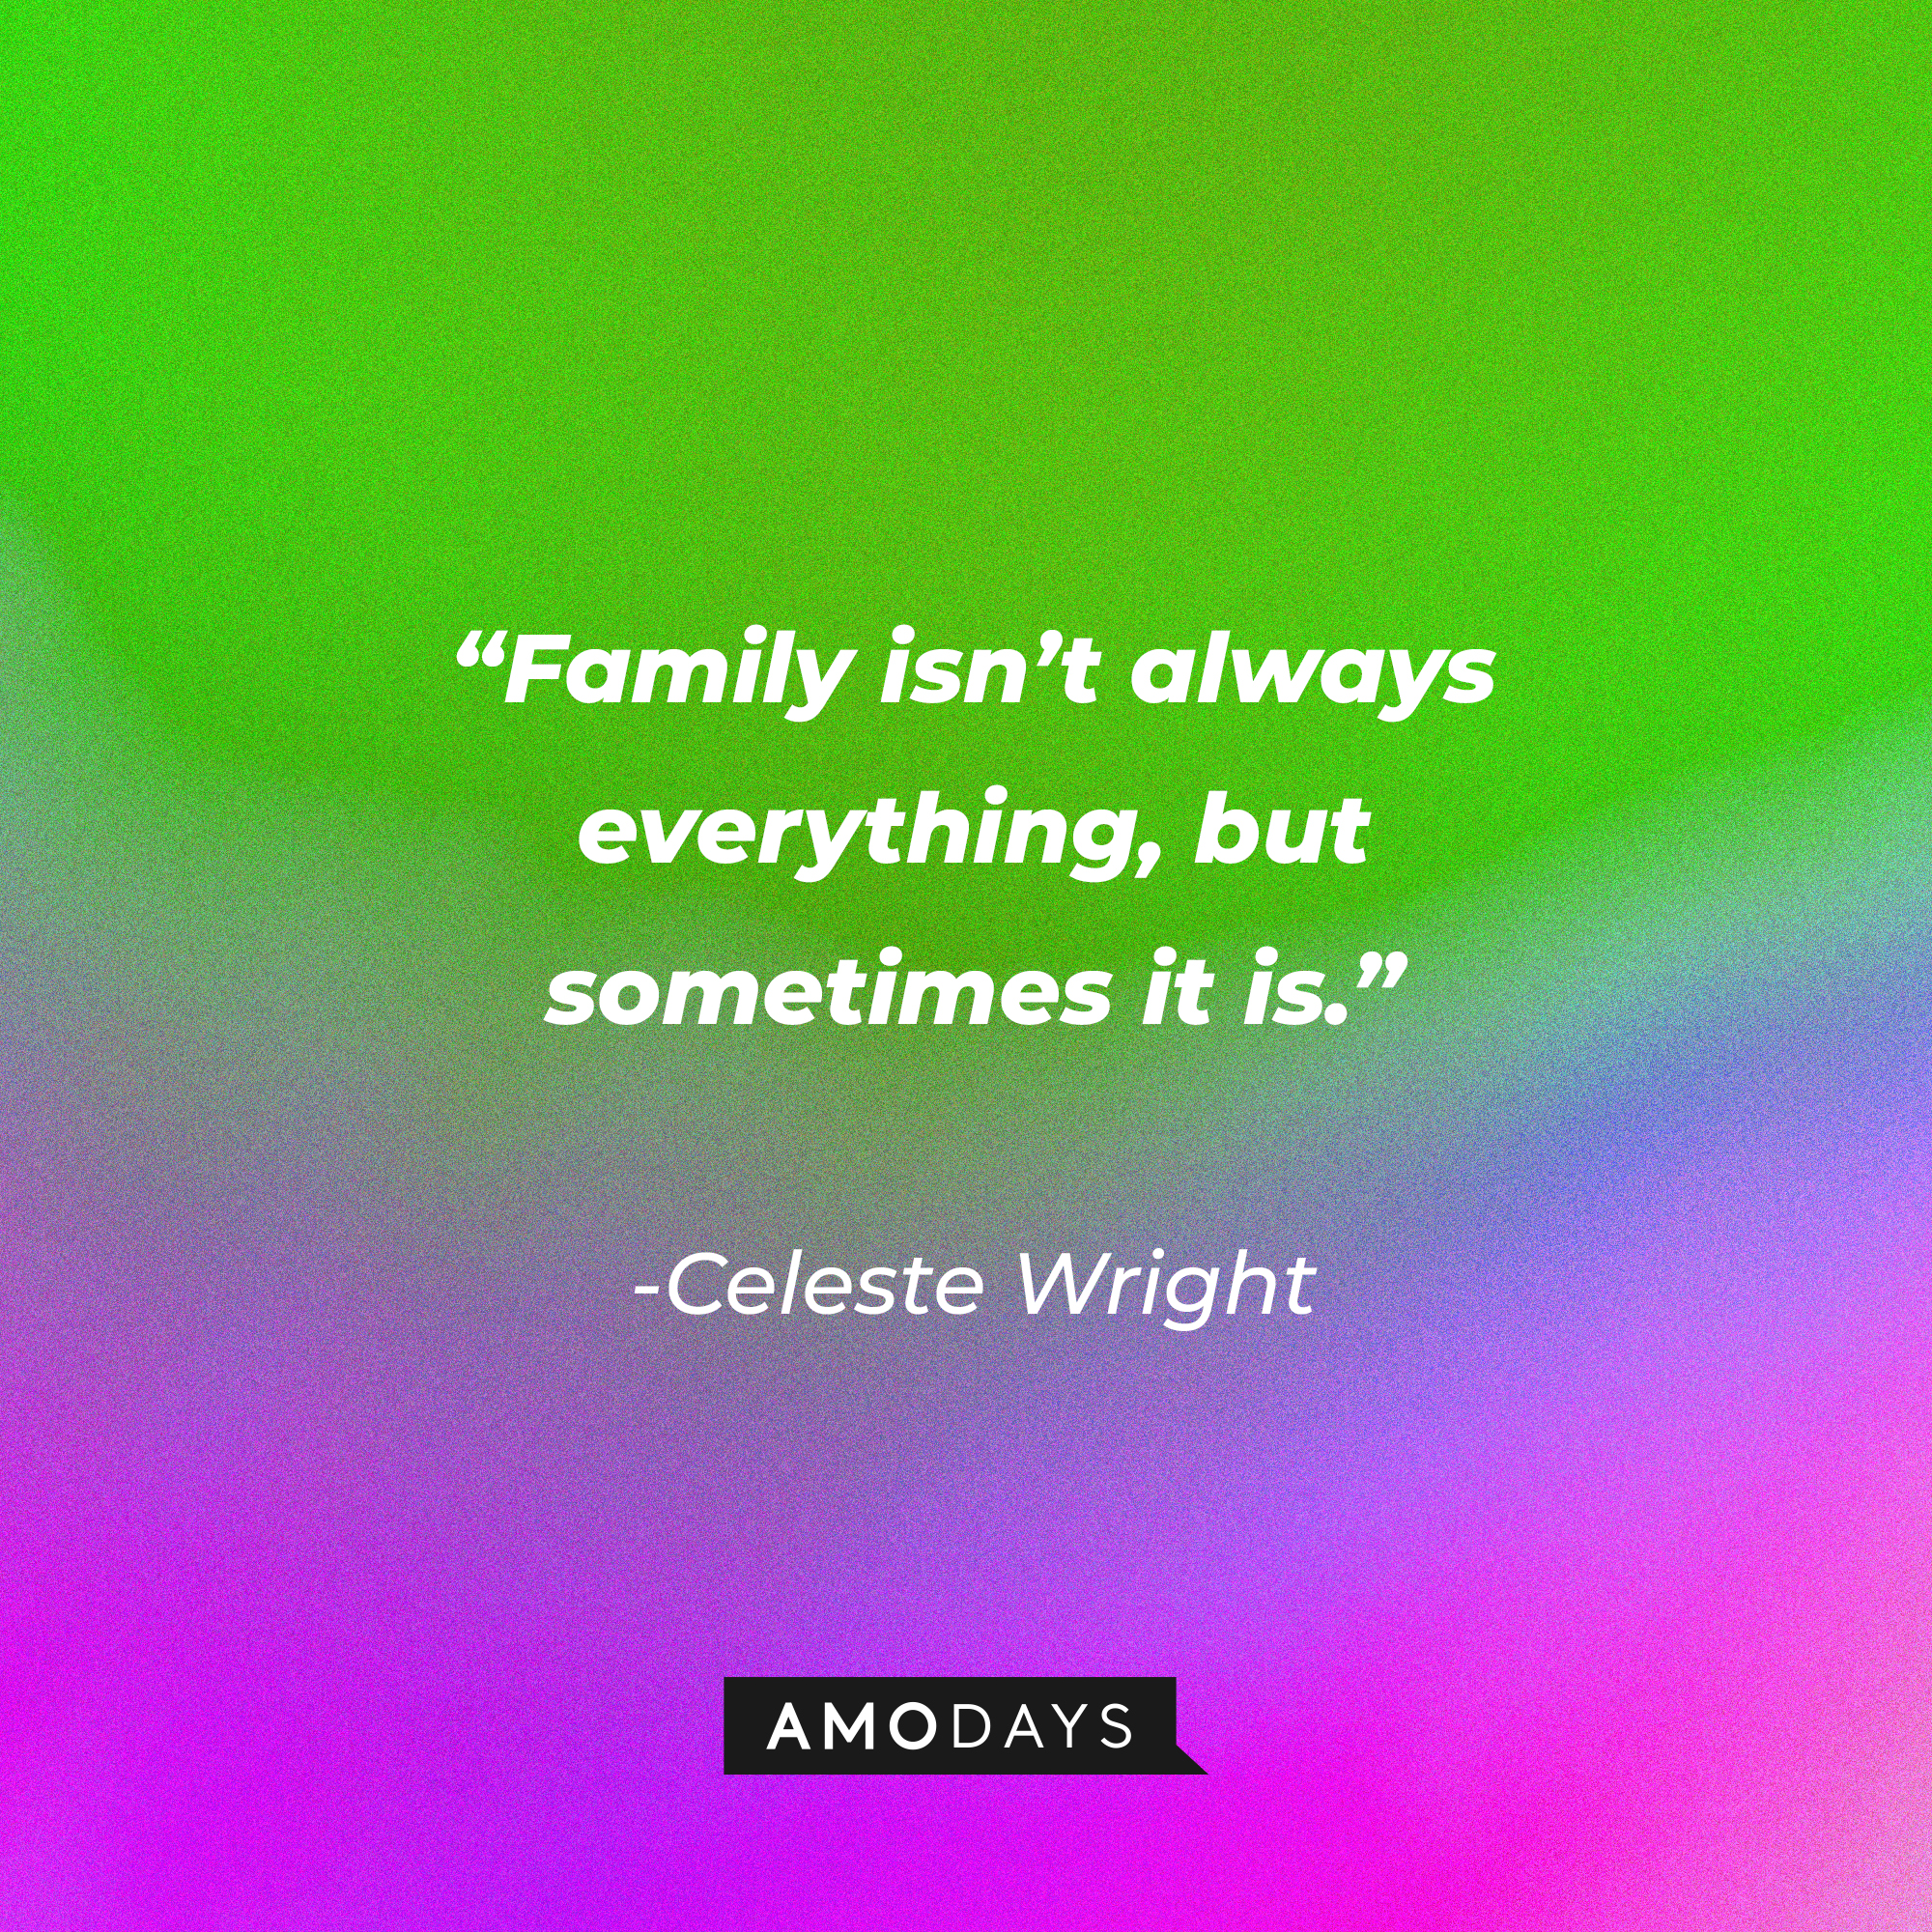 Celeste Wright’s quote: “Family isn’t always everything, but sometimes it is.” │Source: AmoDays